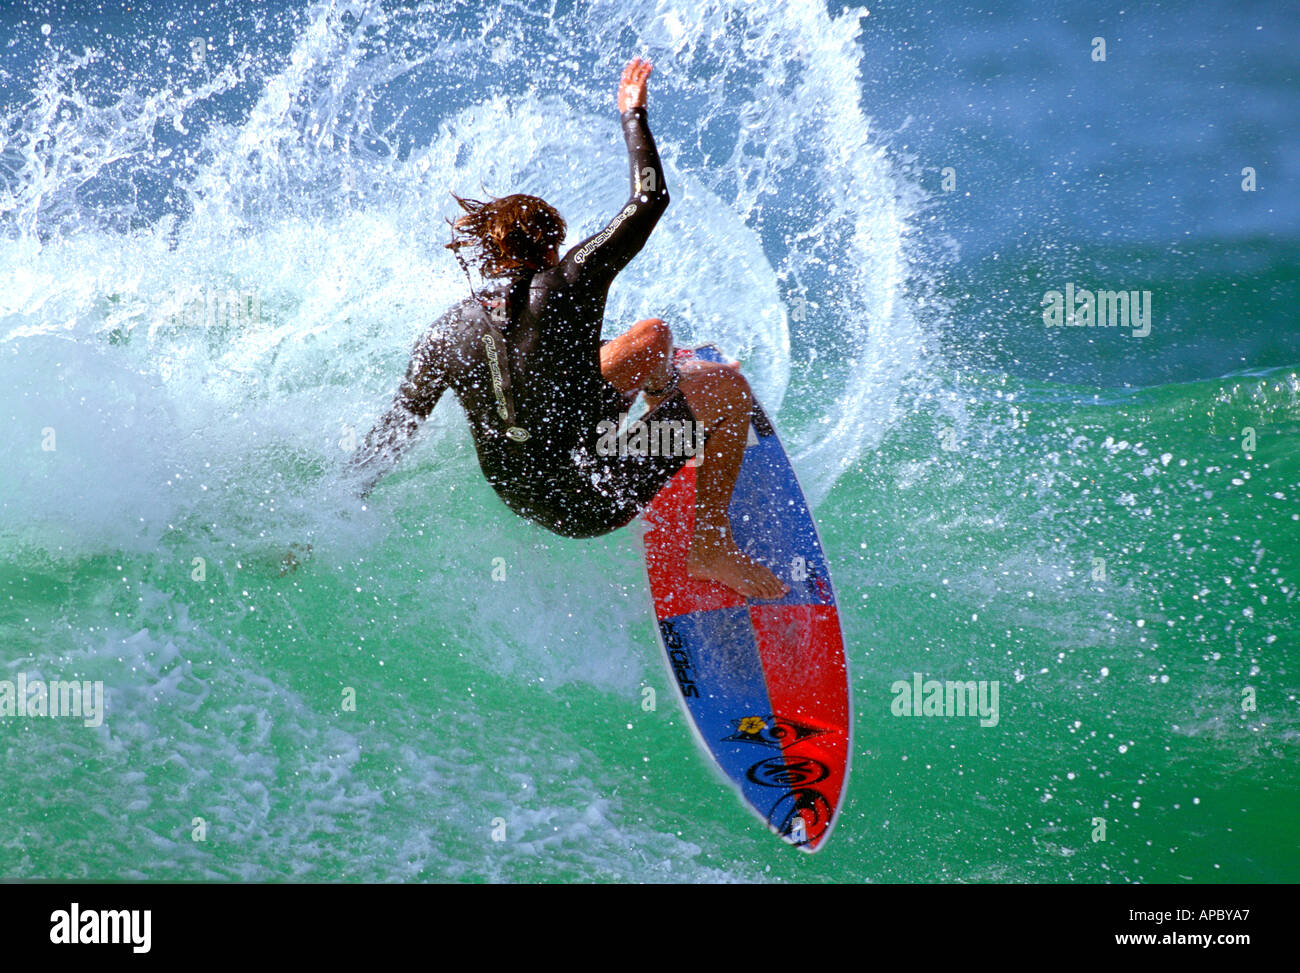 Surfer in cut back action, Gabe Davies, France Stock Photo